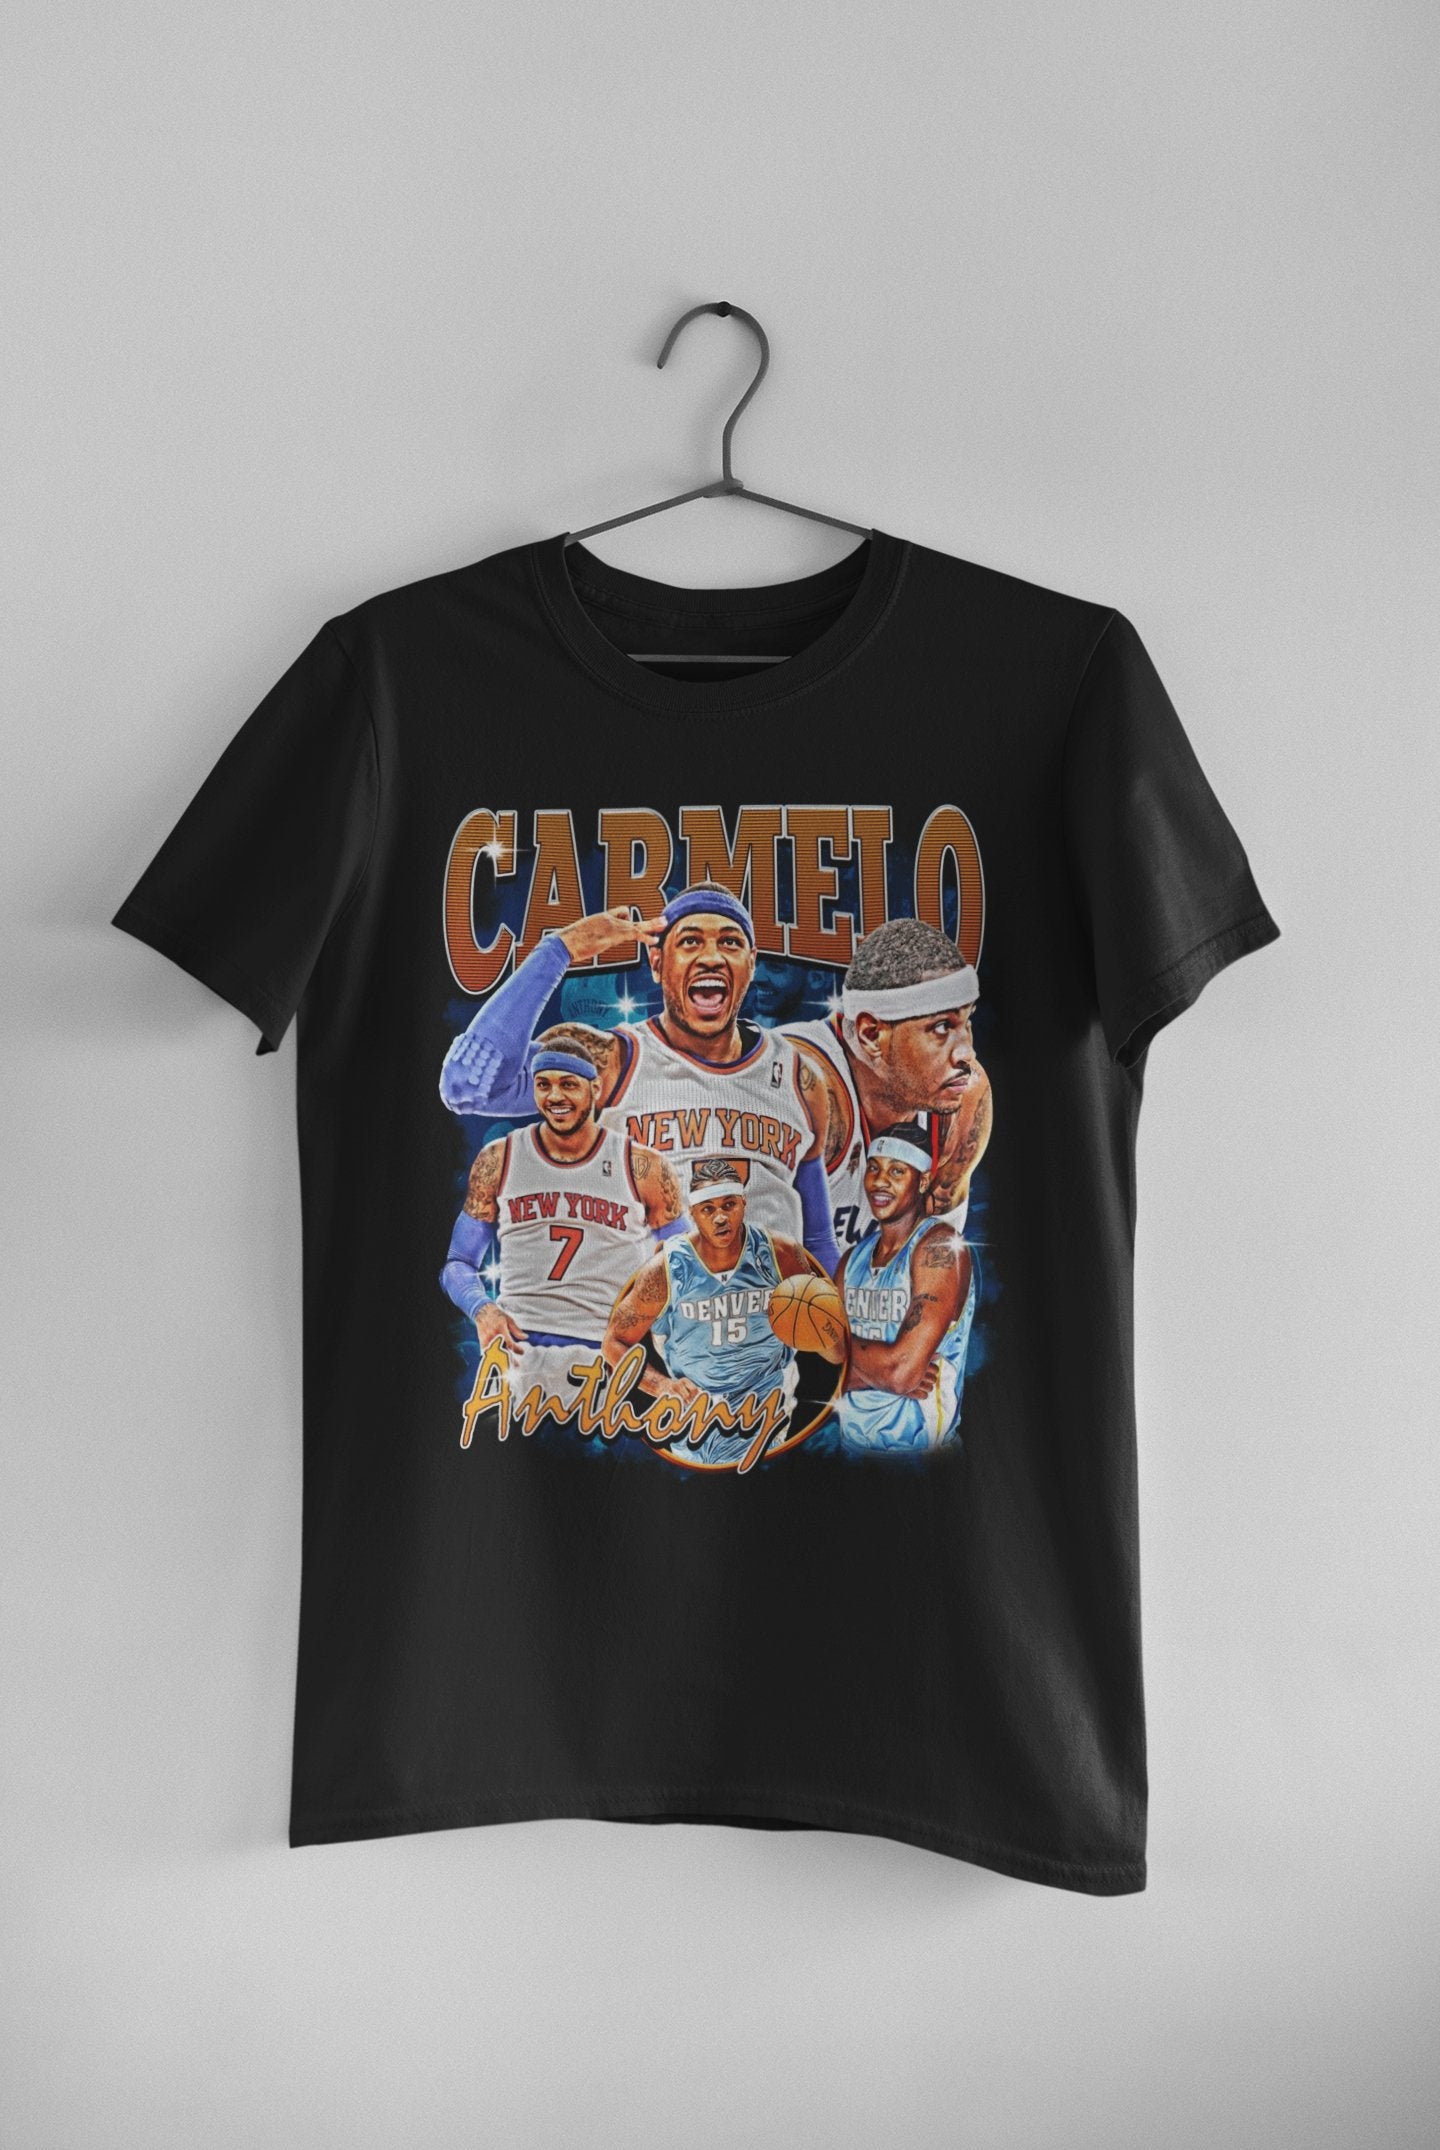 Lamelo Ball Shirt Vintage 90s Bootleg Style Unisex Graphic 